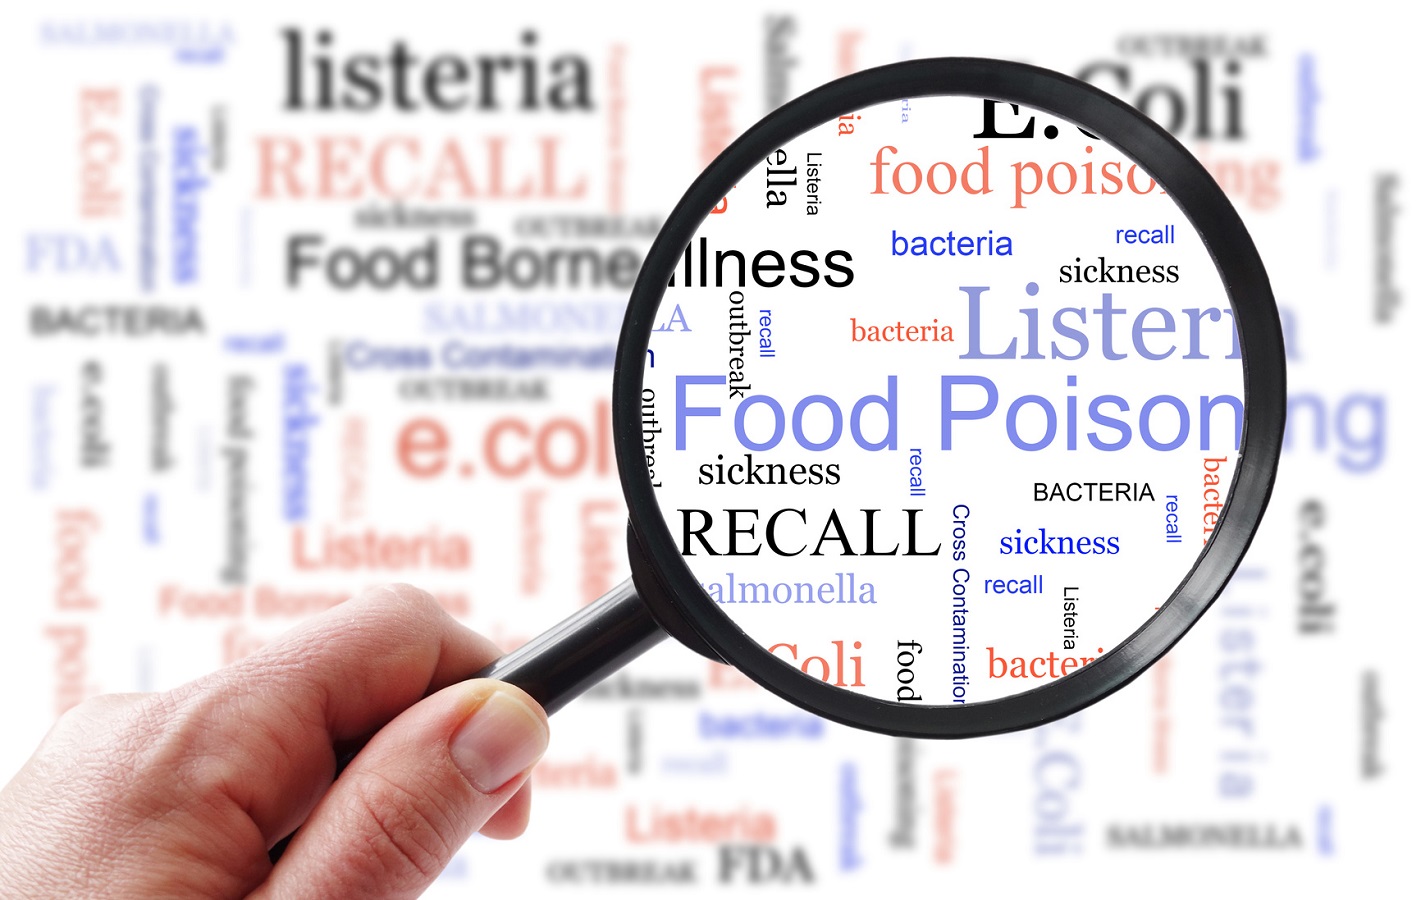 What is new in core investigations of foodborne illness outbreaks